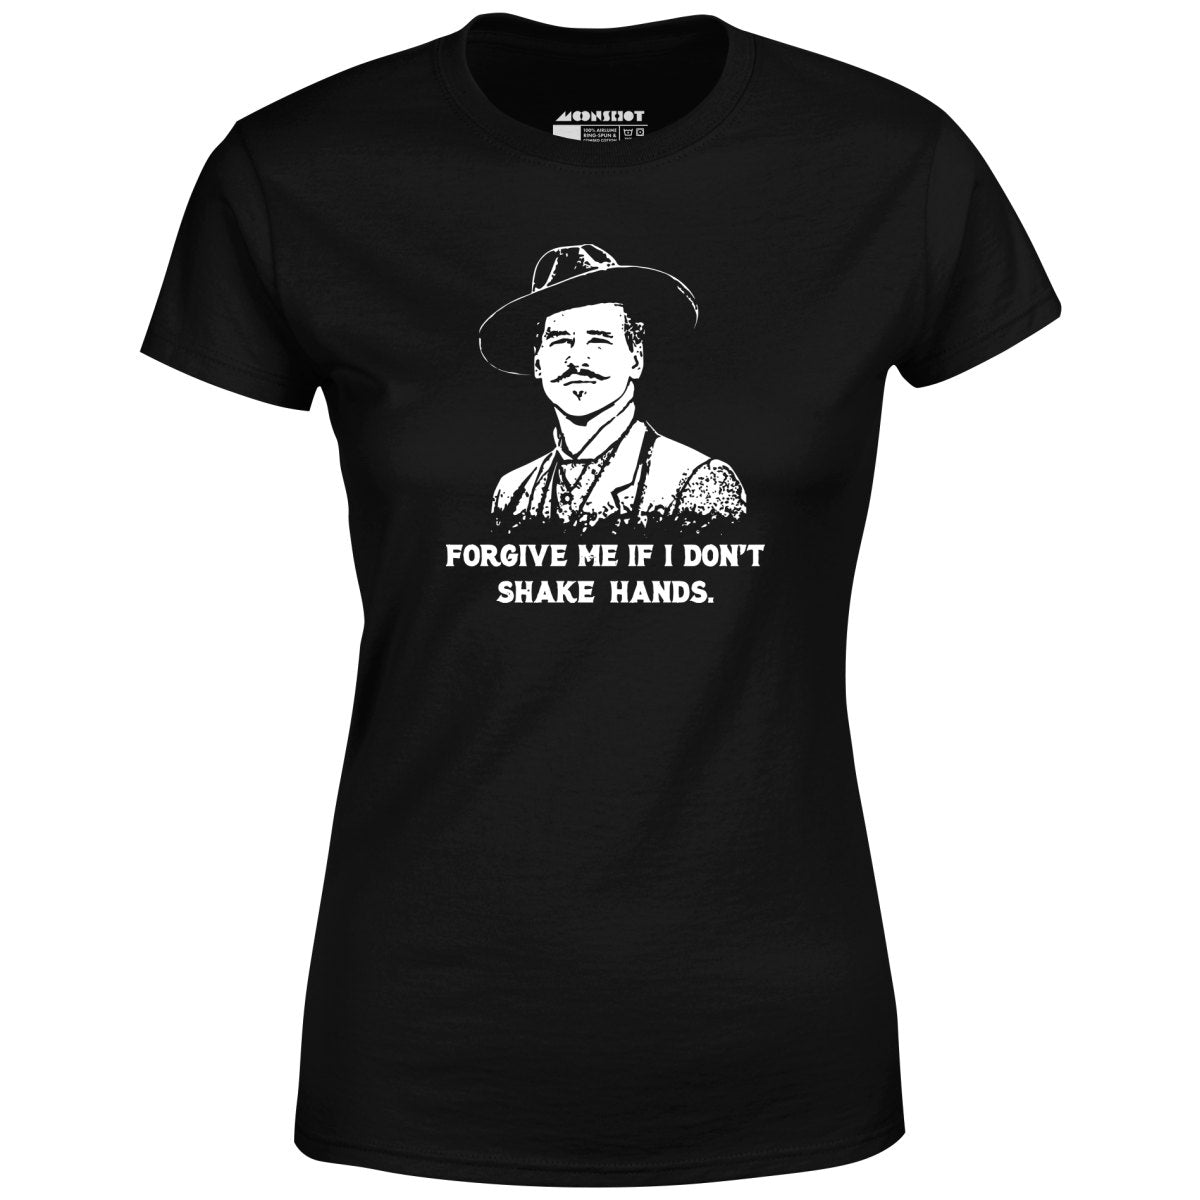 Doc Holliday - Forgive Me if I Don't Shake Hands - Women's T-Shirt